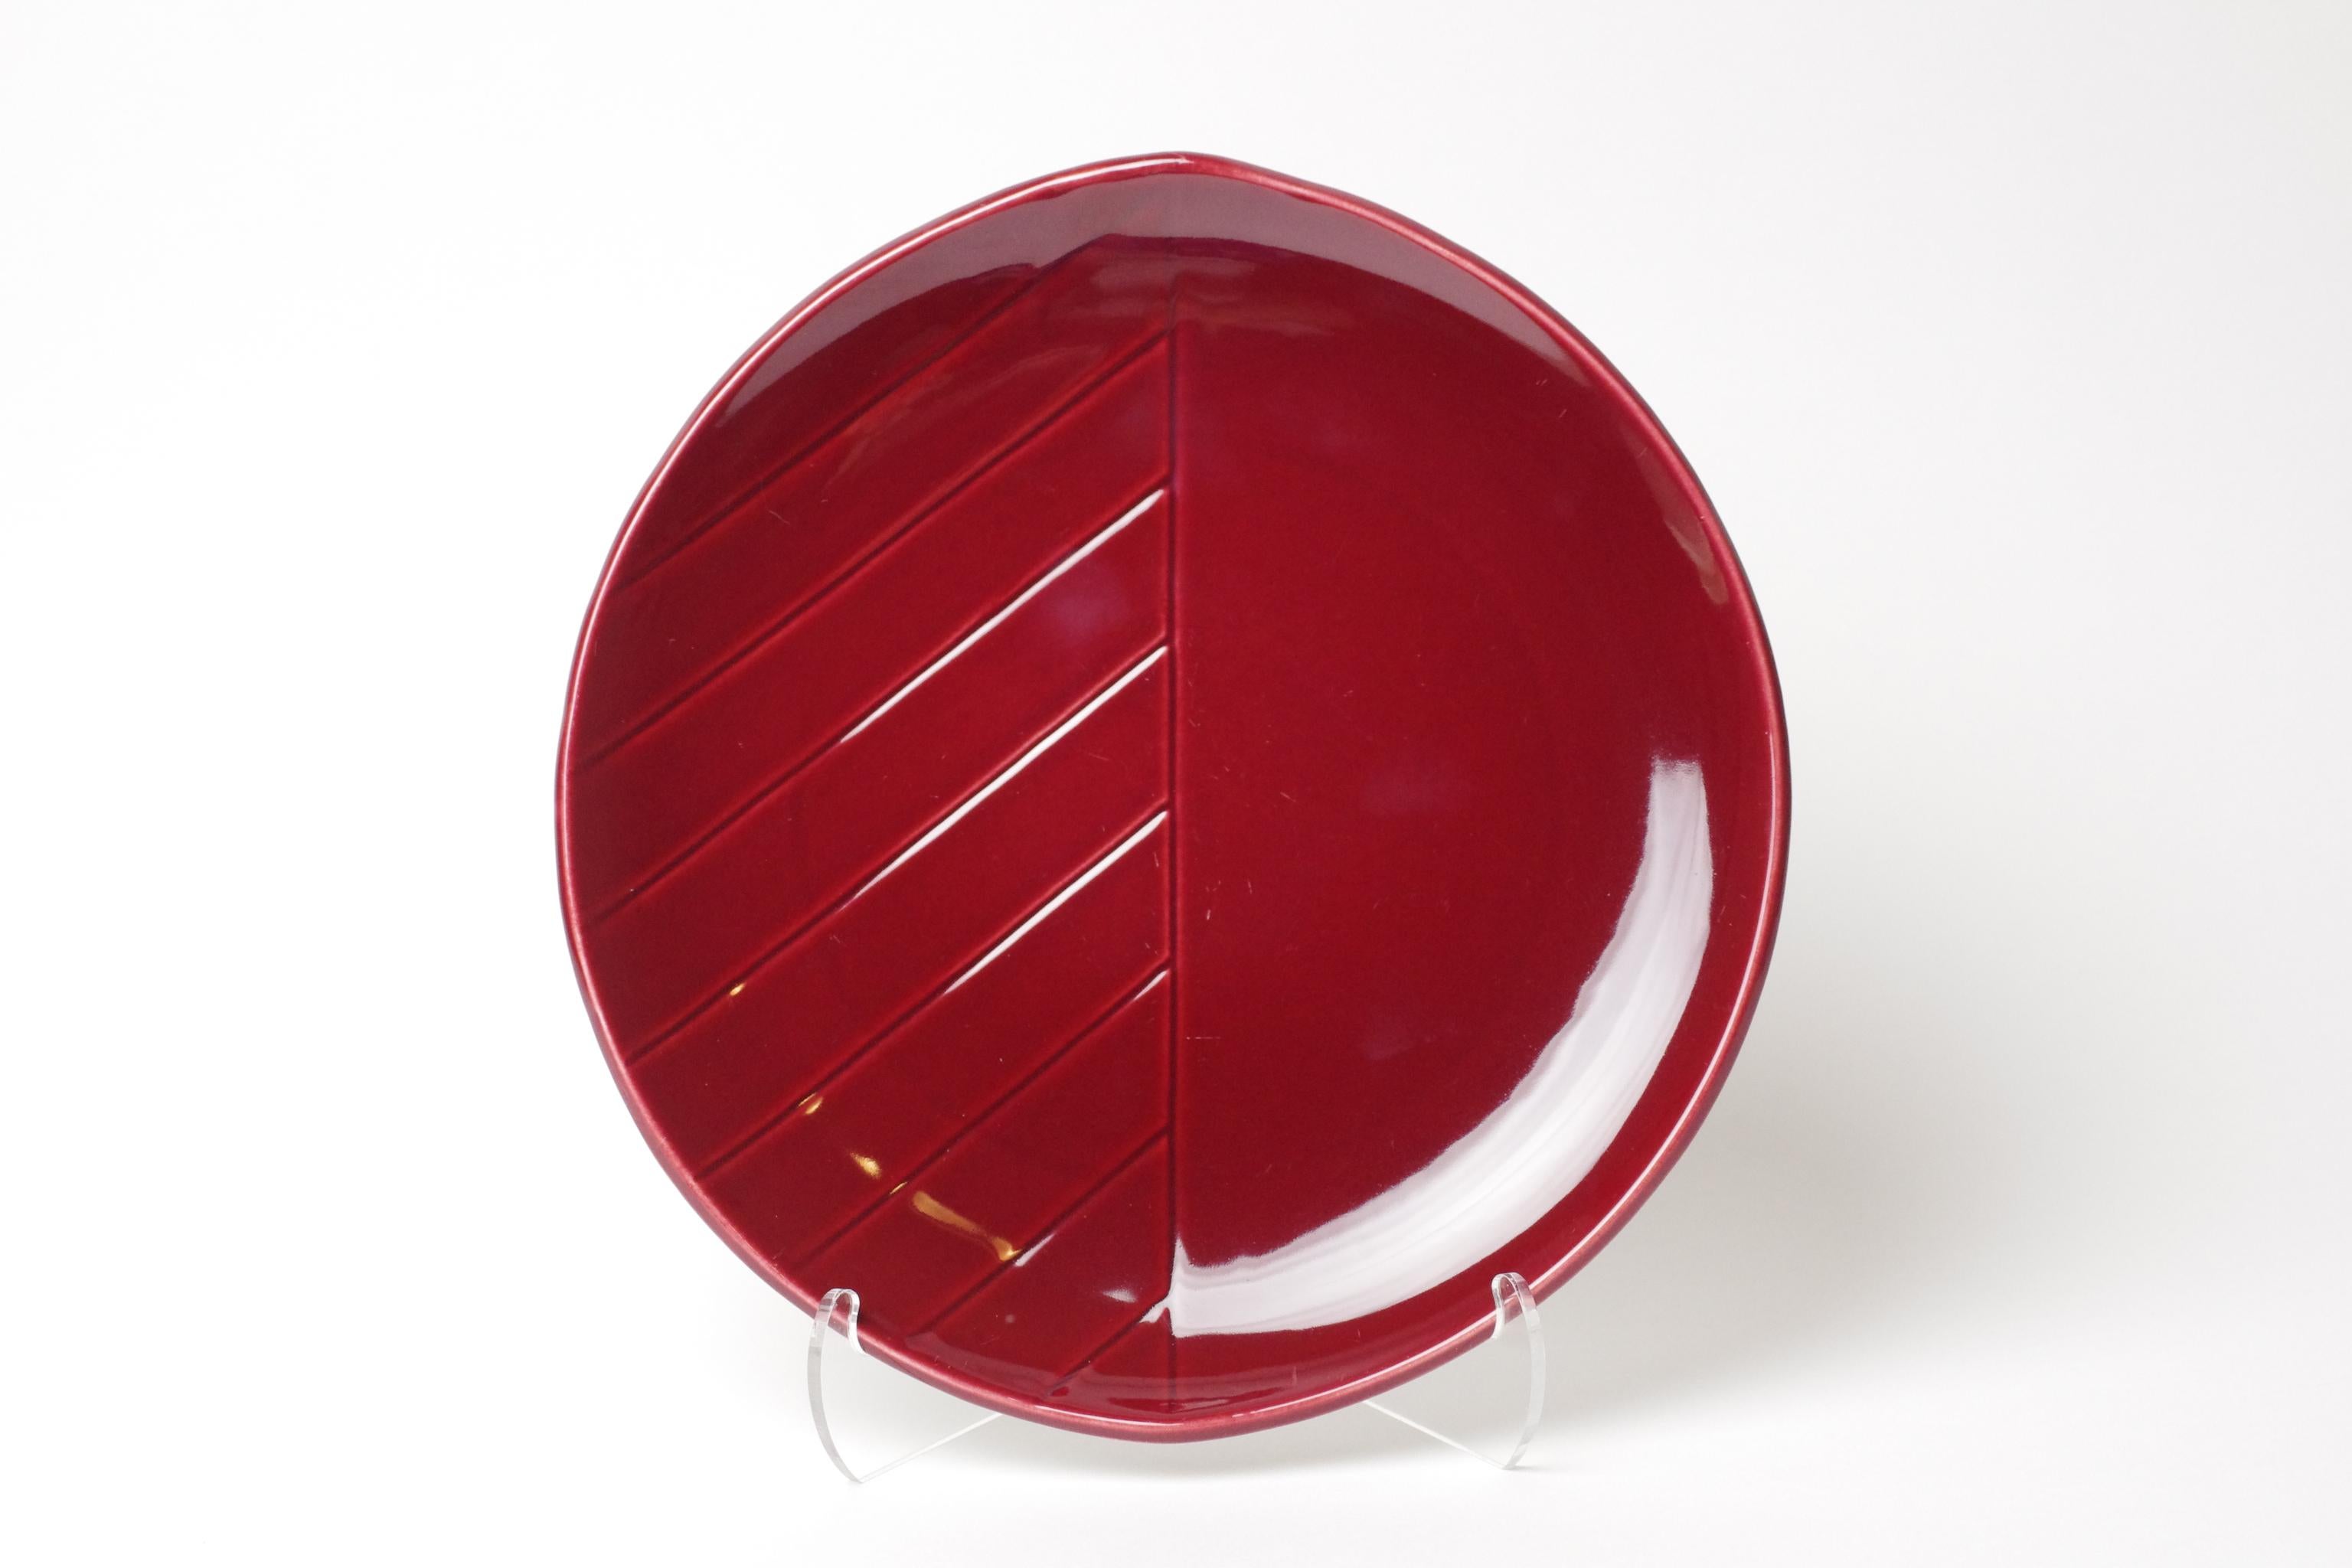 Product Description:
The California series, of which we offer 6 red plates here, was designed by Carl-Harry Stålhane in 1952. Stålhane's works are well known for their quality and his versatility as an artist is renowned. Stålhane created functional